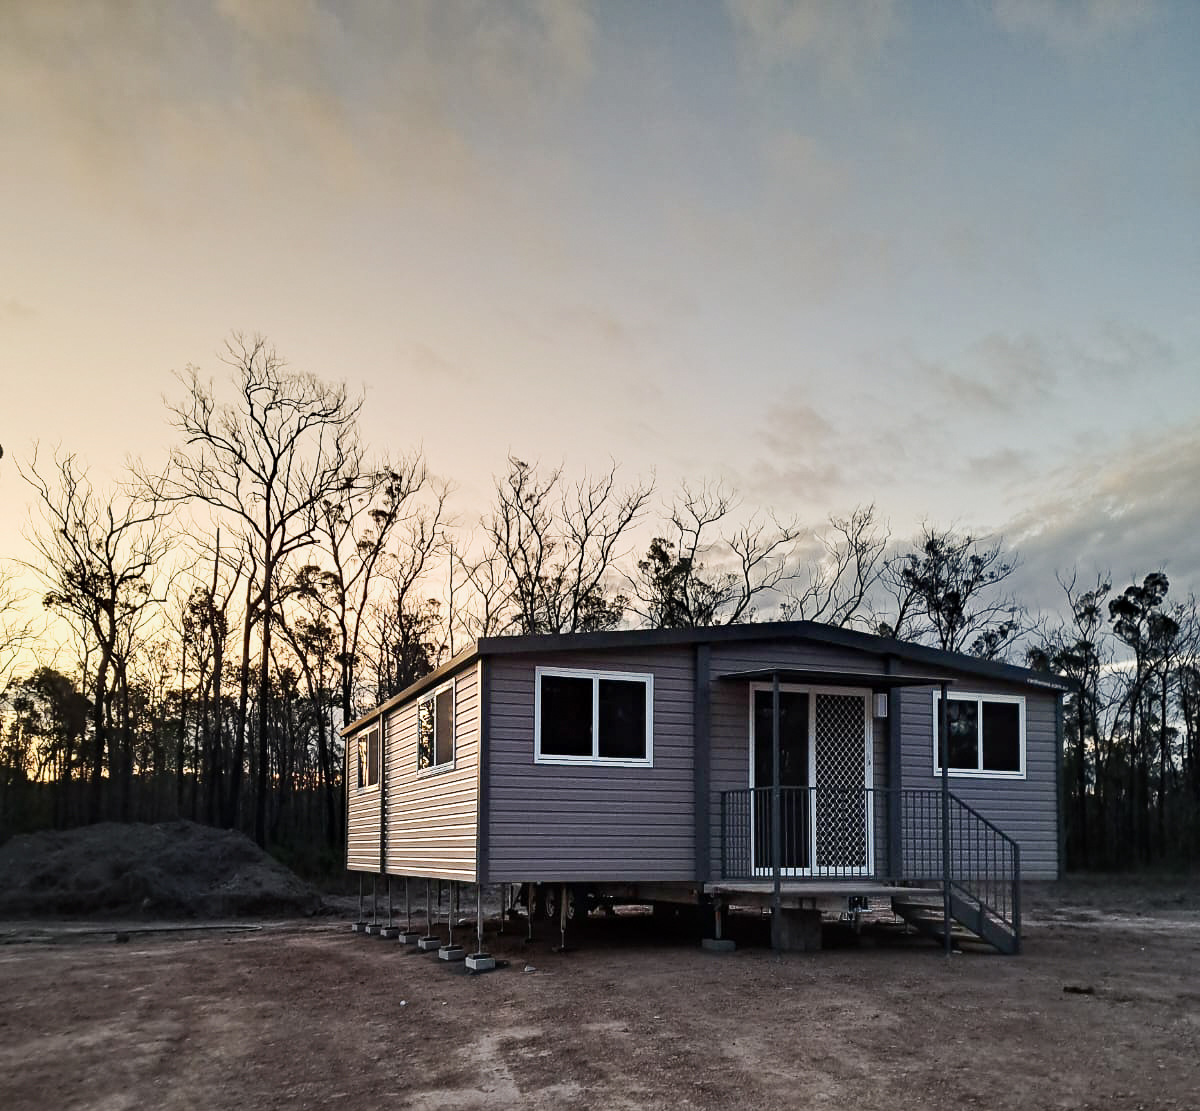 Check out Australia's fully relocatable granny flat solution. 🇦🇺 🏠
👉 bit.ly/4aNhTu2
#VanHomes #AustralianMade #GrannyFlatSolution #AffordableLiving #StylishHomes